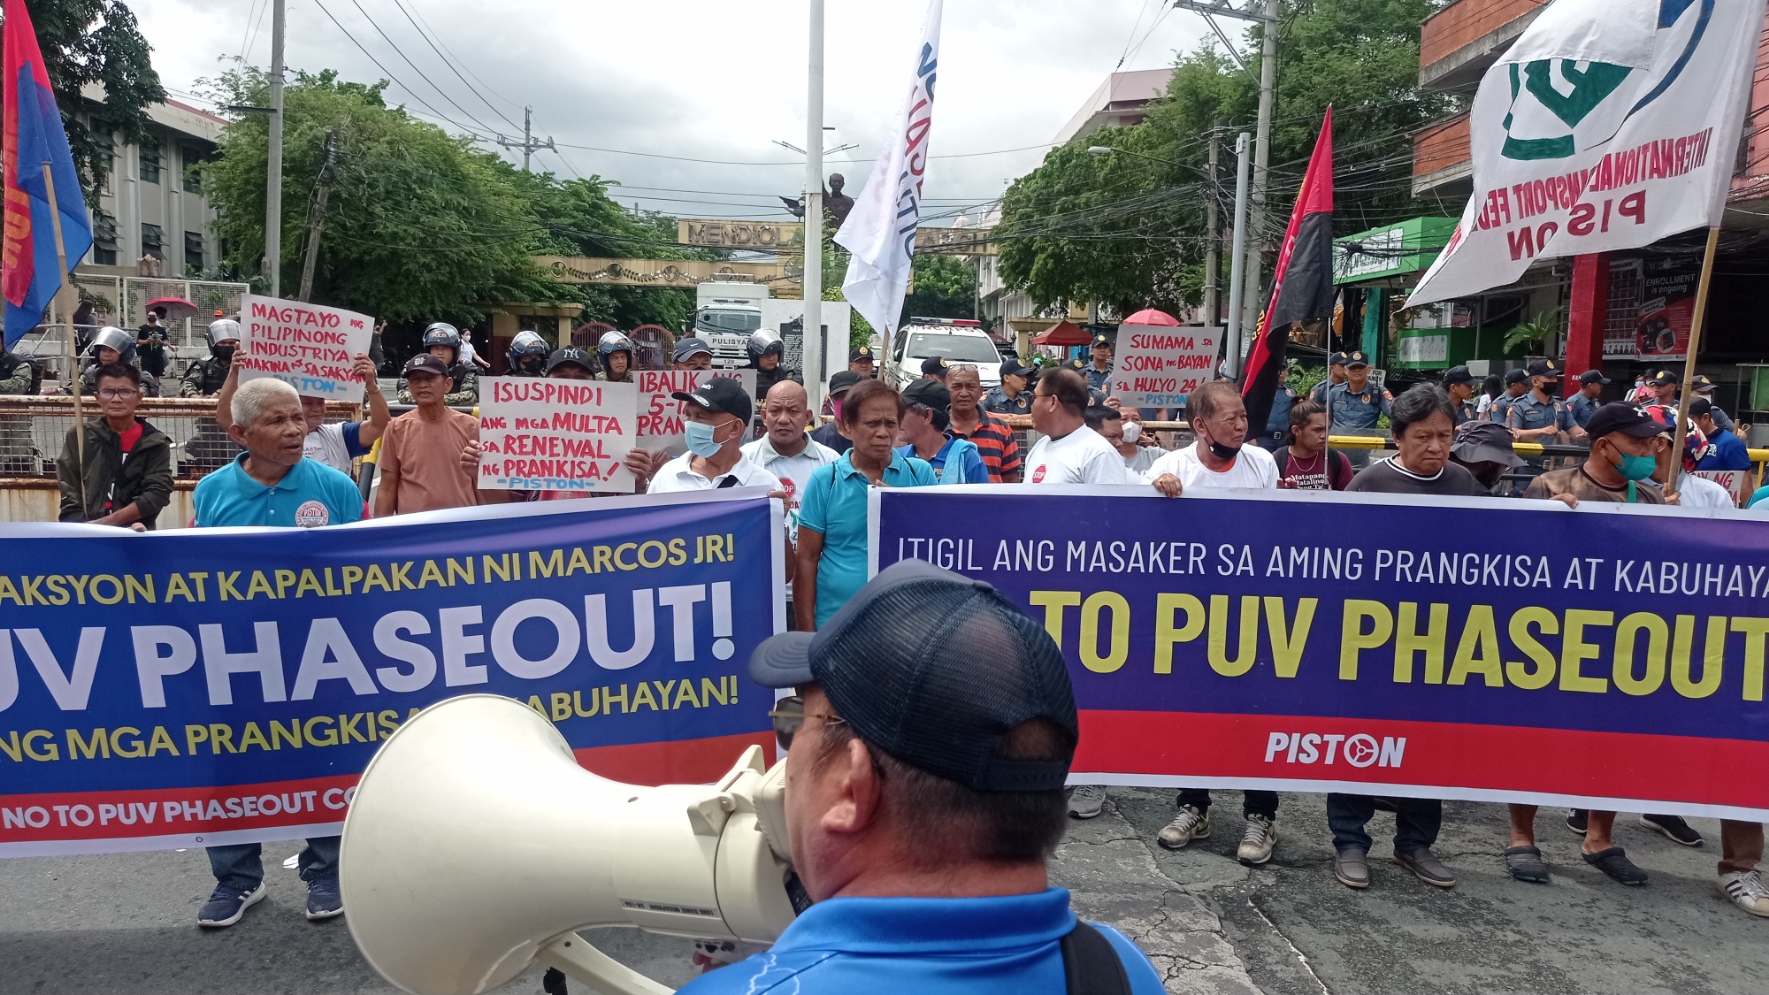 PISTON presses Marcos Jr to address PUVMP woes, reiterates demand to junk OFG